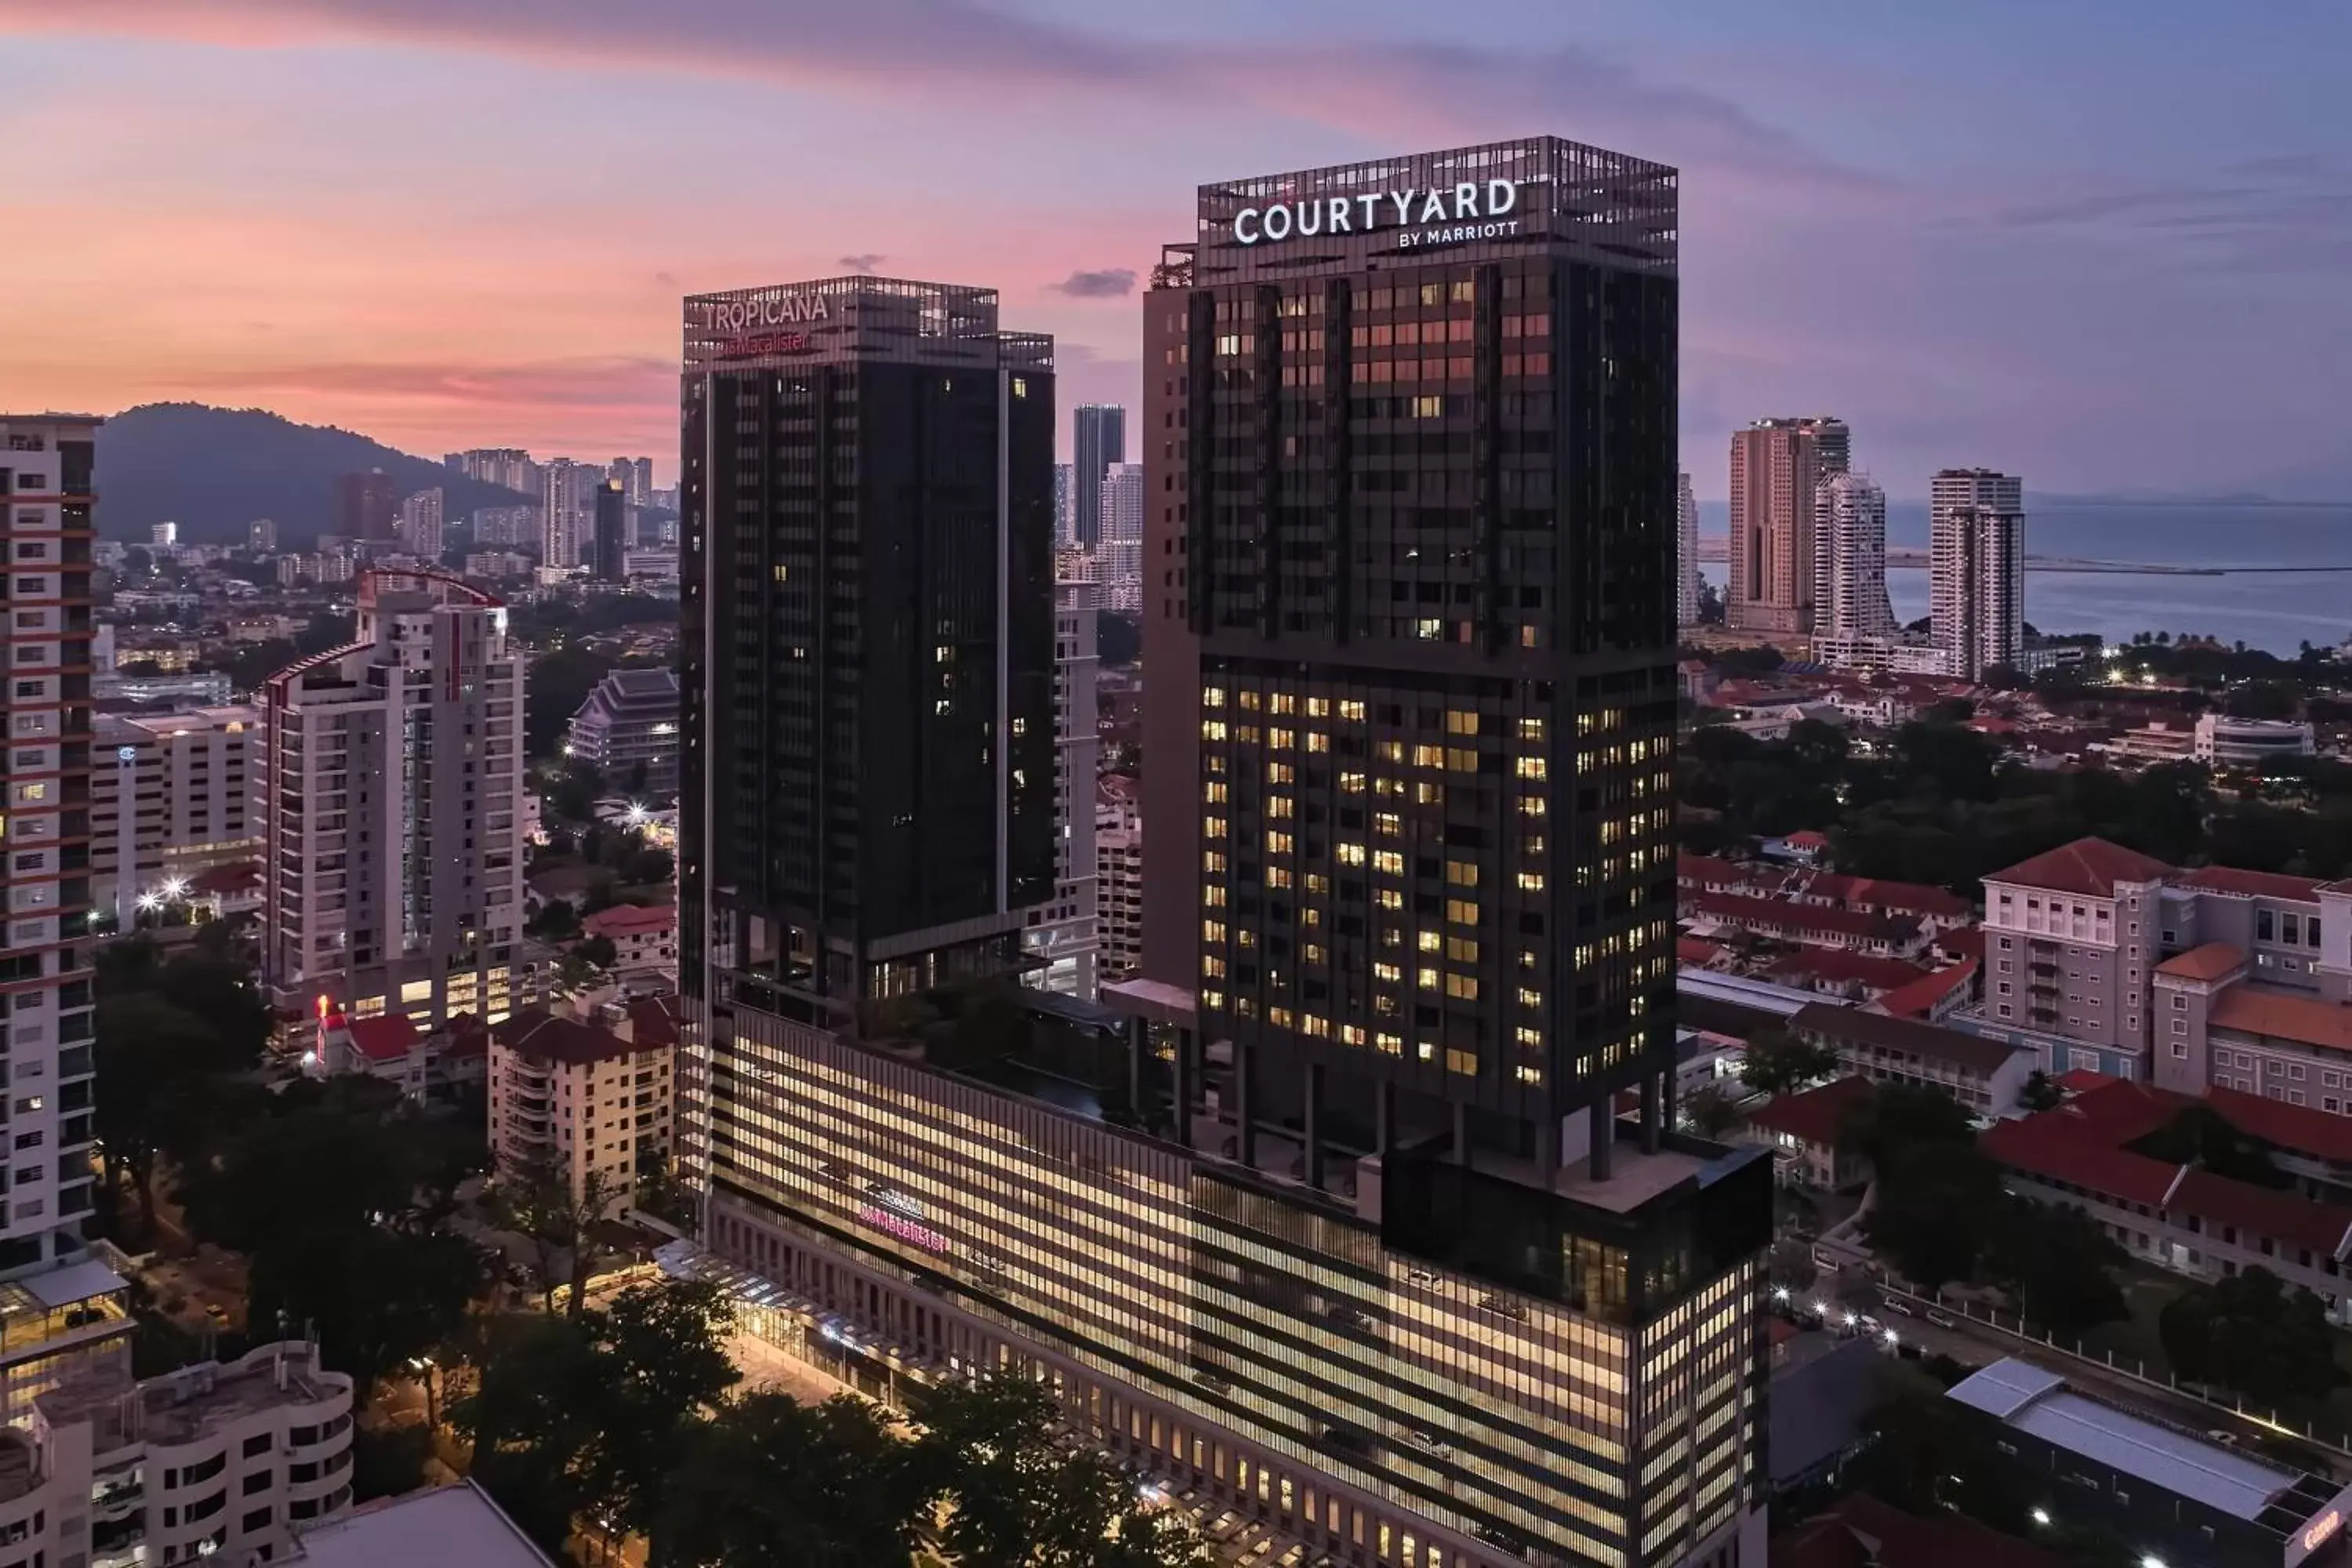 Property building in Courtyard by Marriott Penang